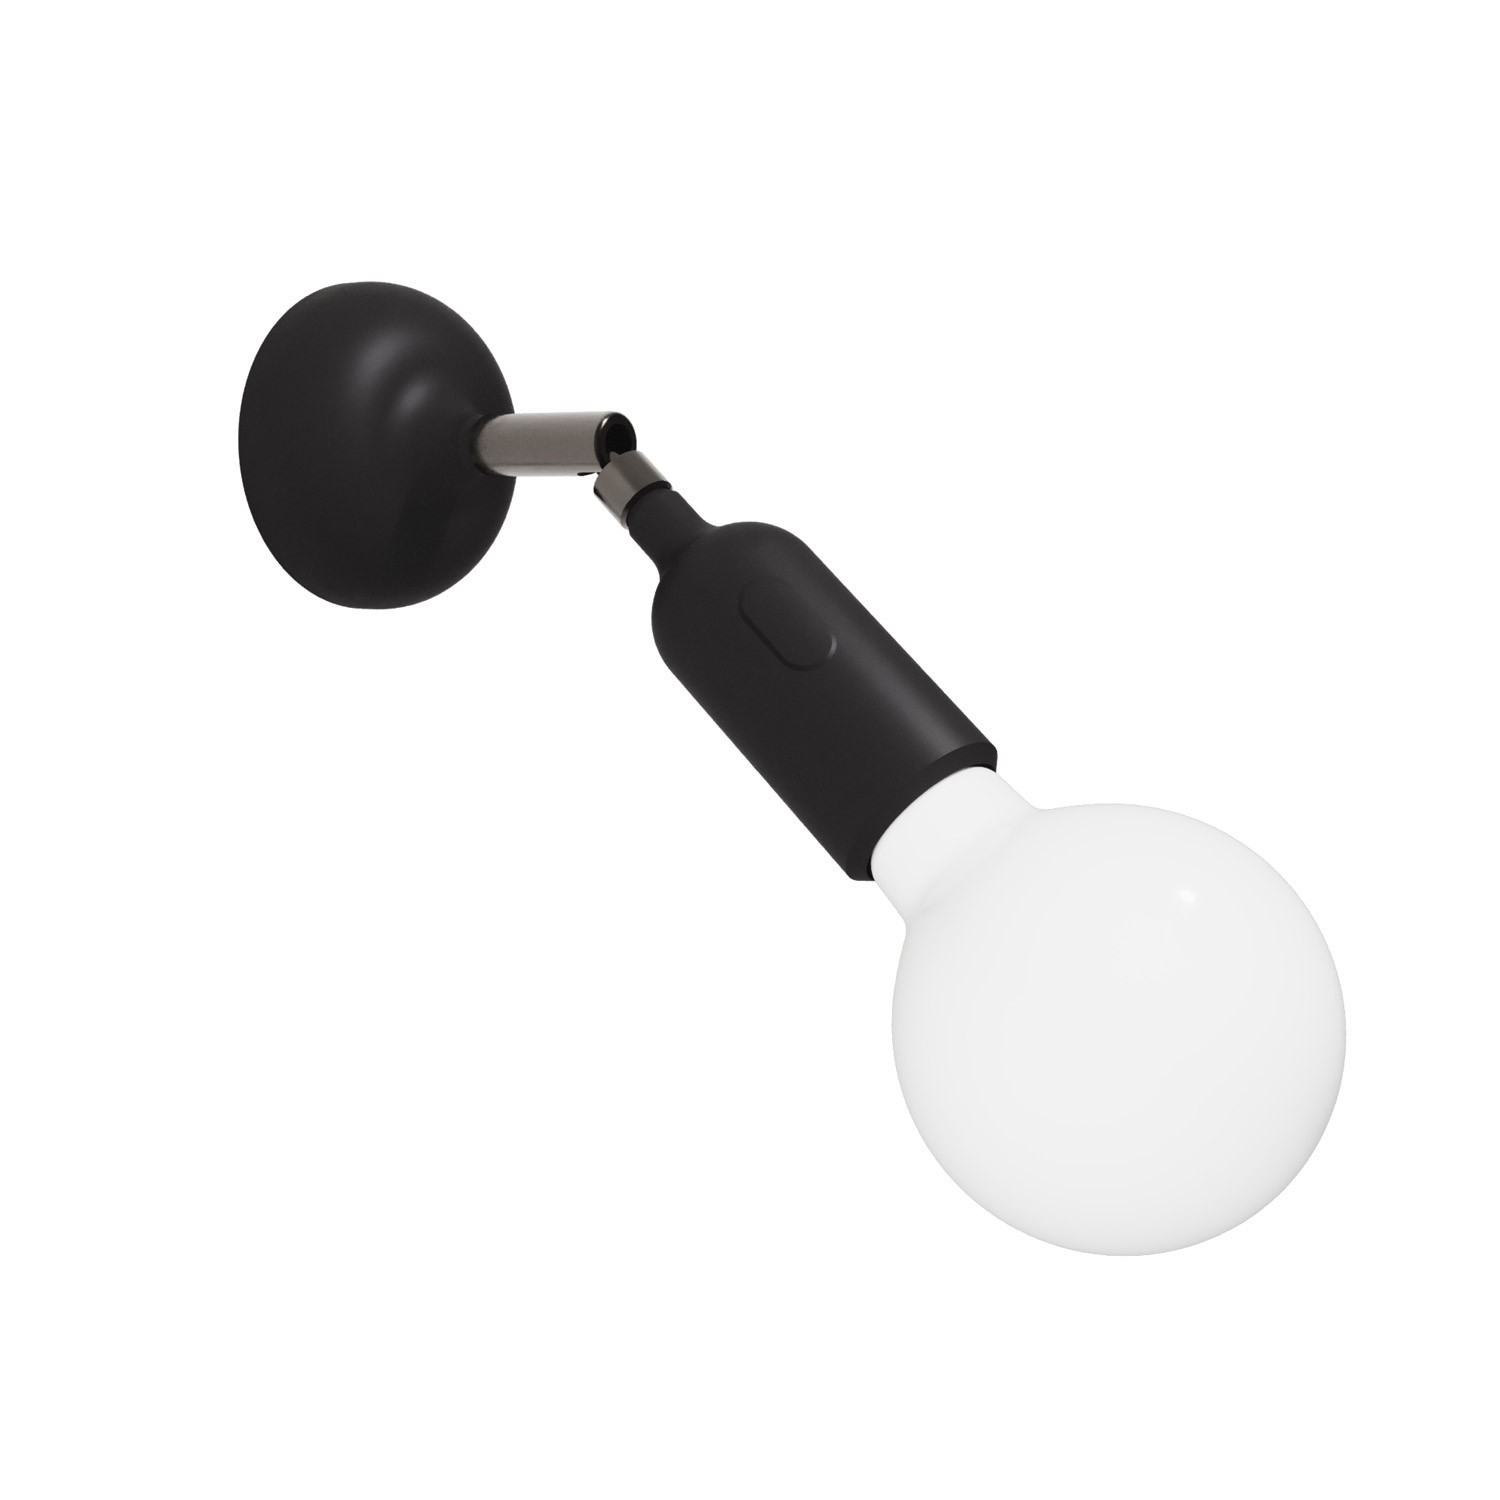 Silicone Fermaluce lamp with joint and built-in switch